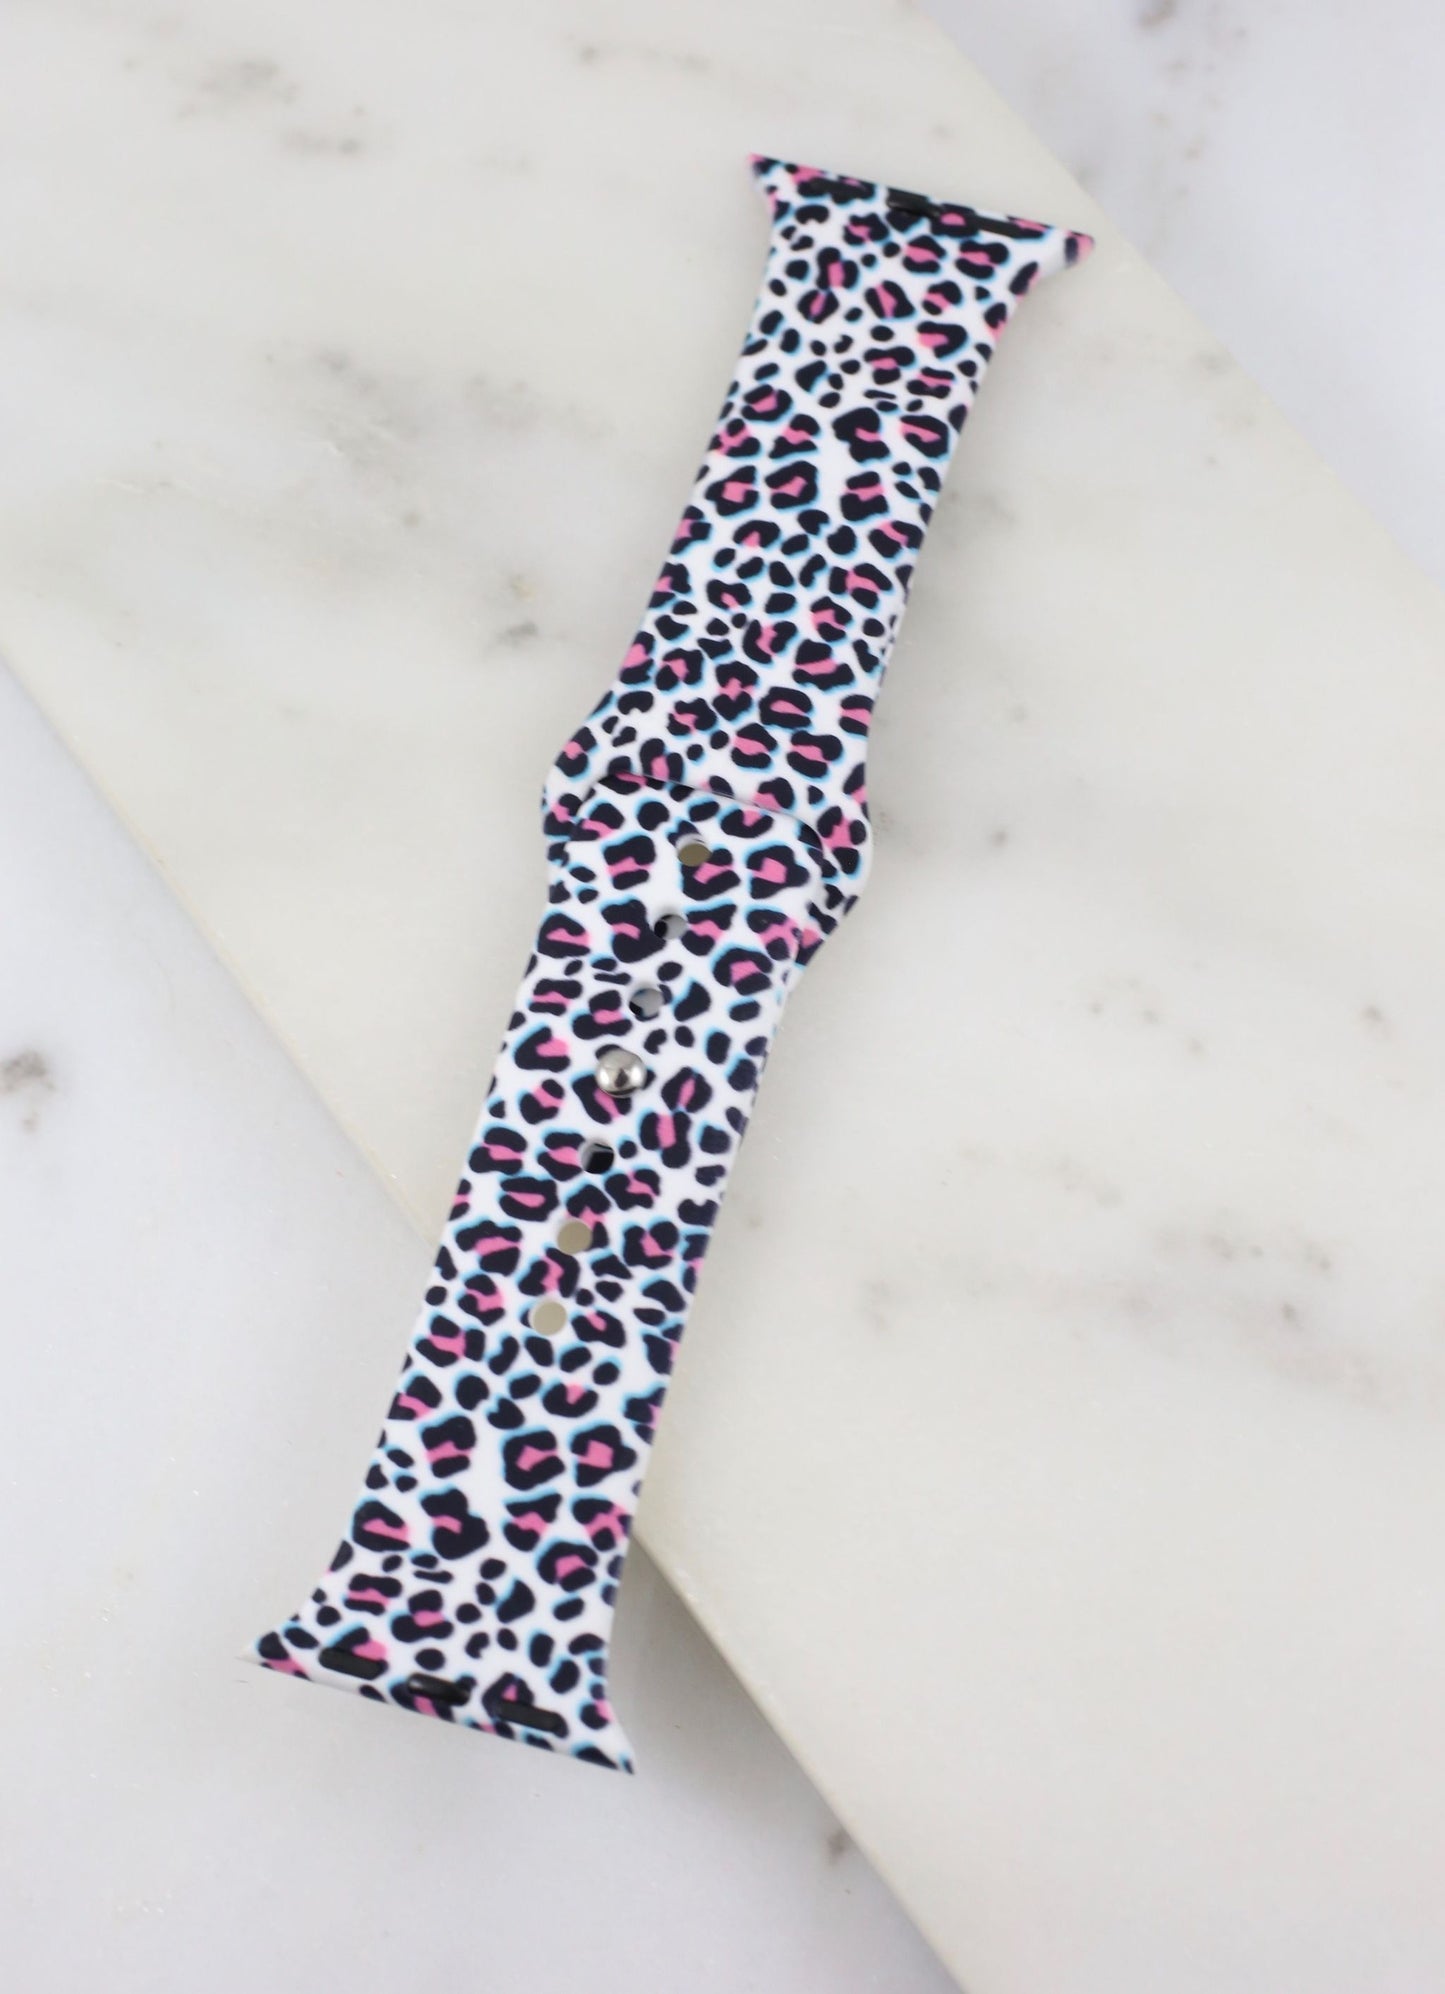 Multi Colored Leopard Apple Watch Band